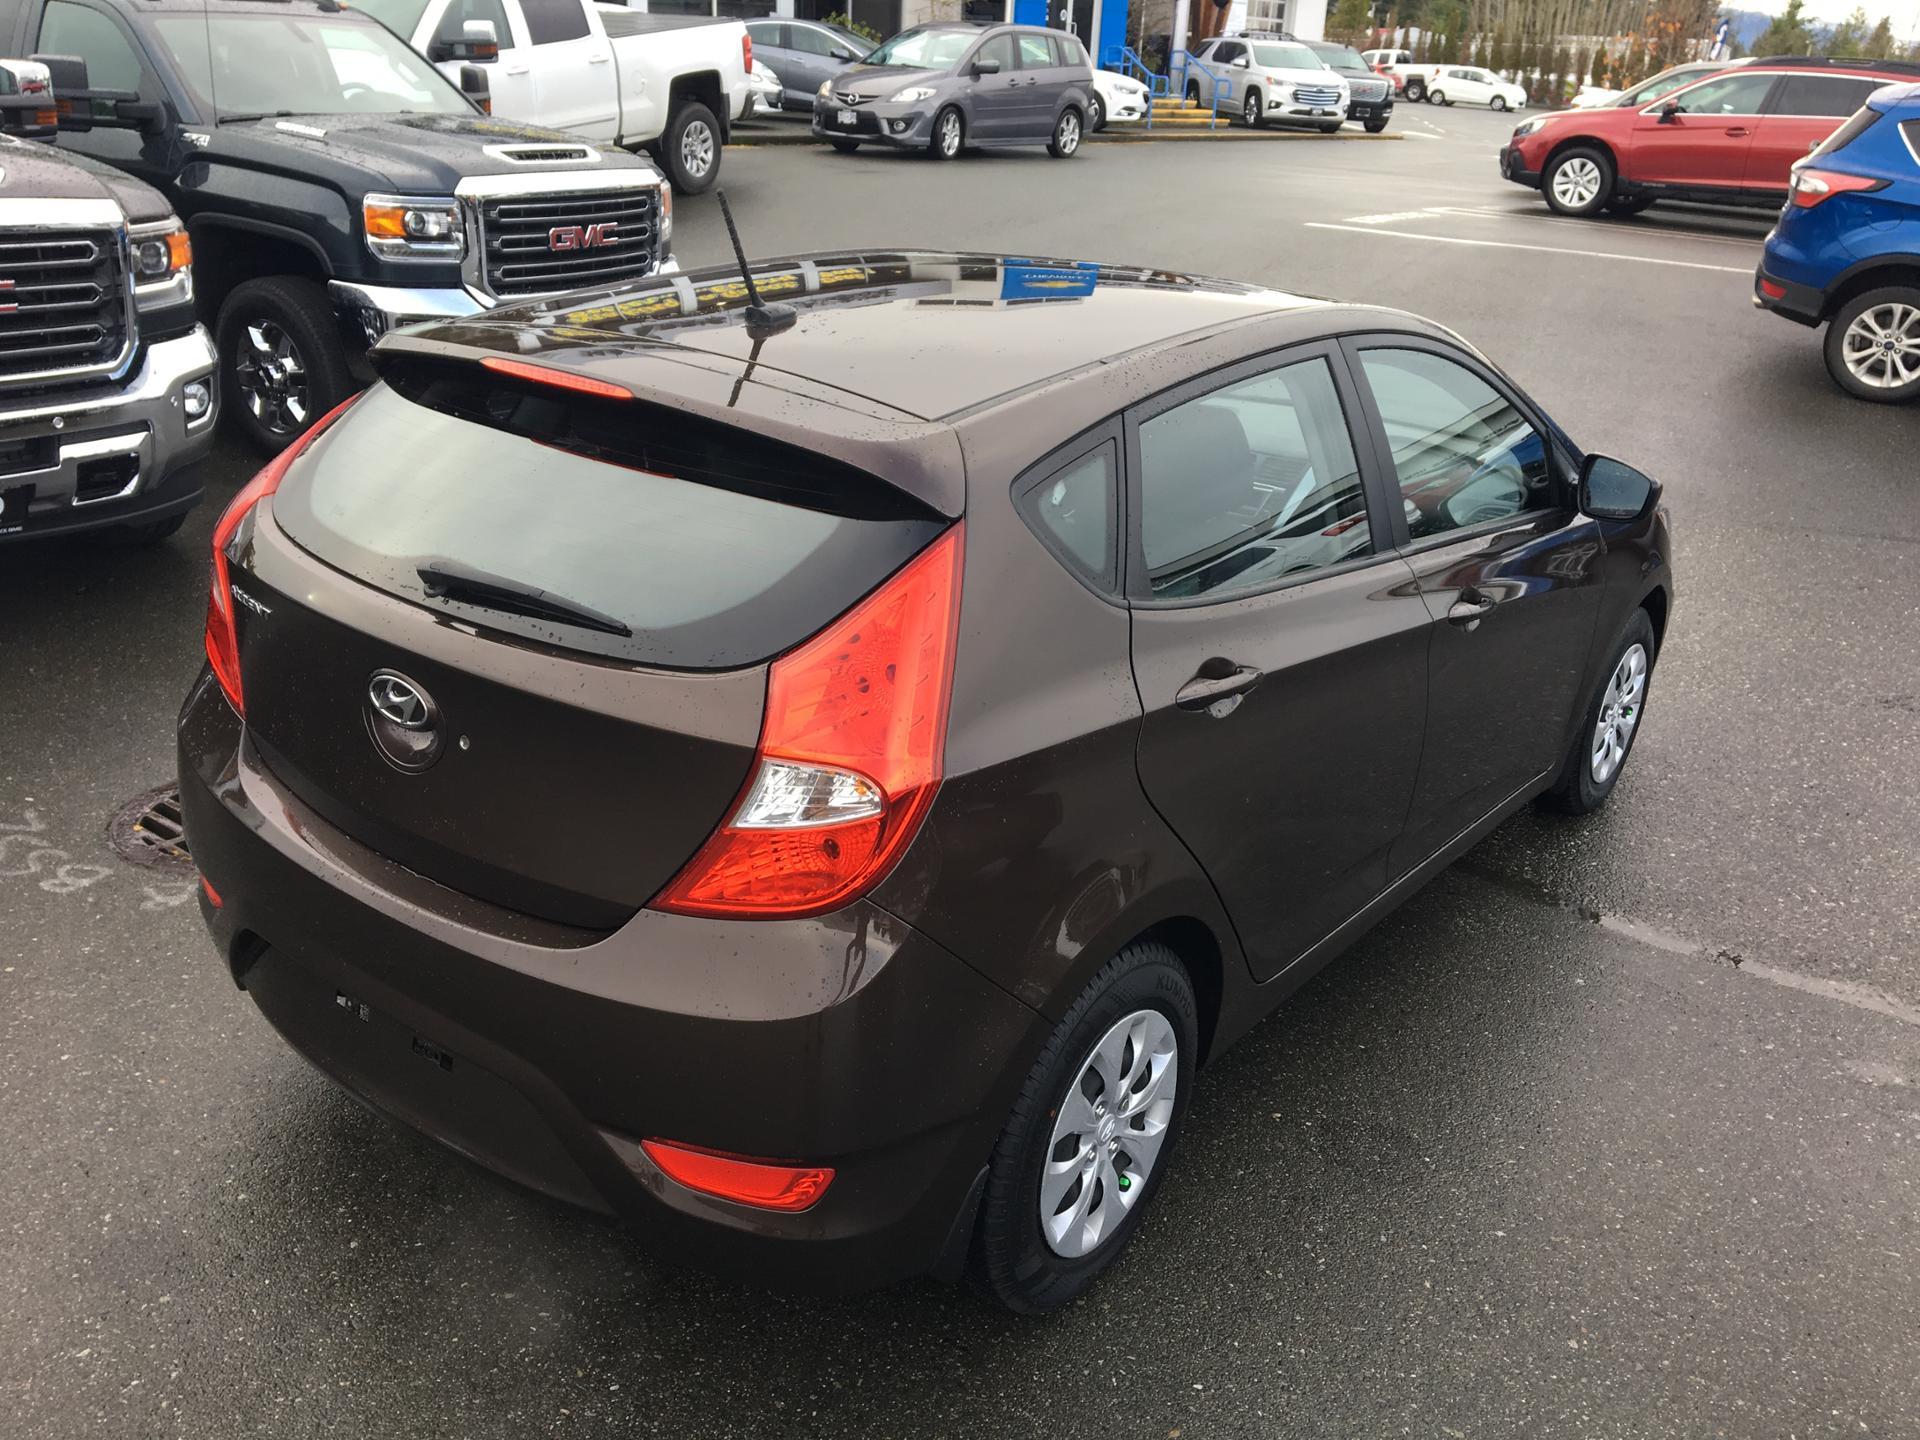 Pre-Owned 2016 Hyundai Accent Hatchback 4 Door in Parksville #18191A ...